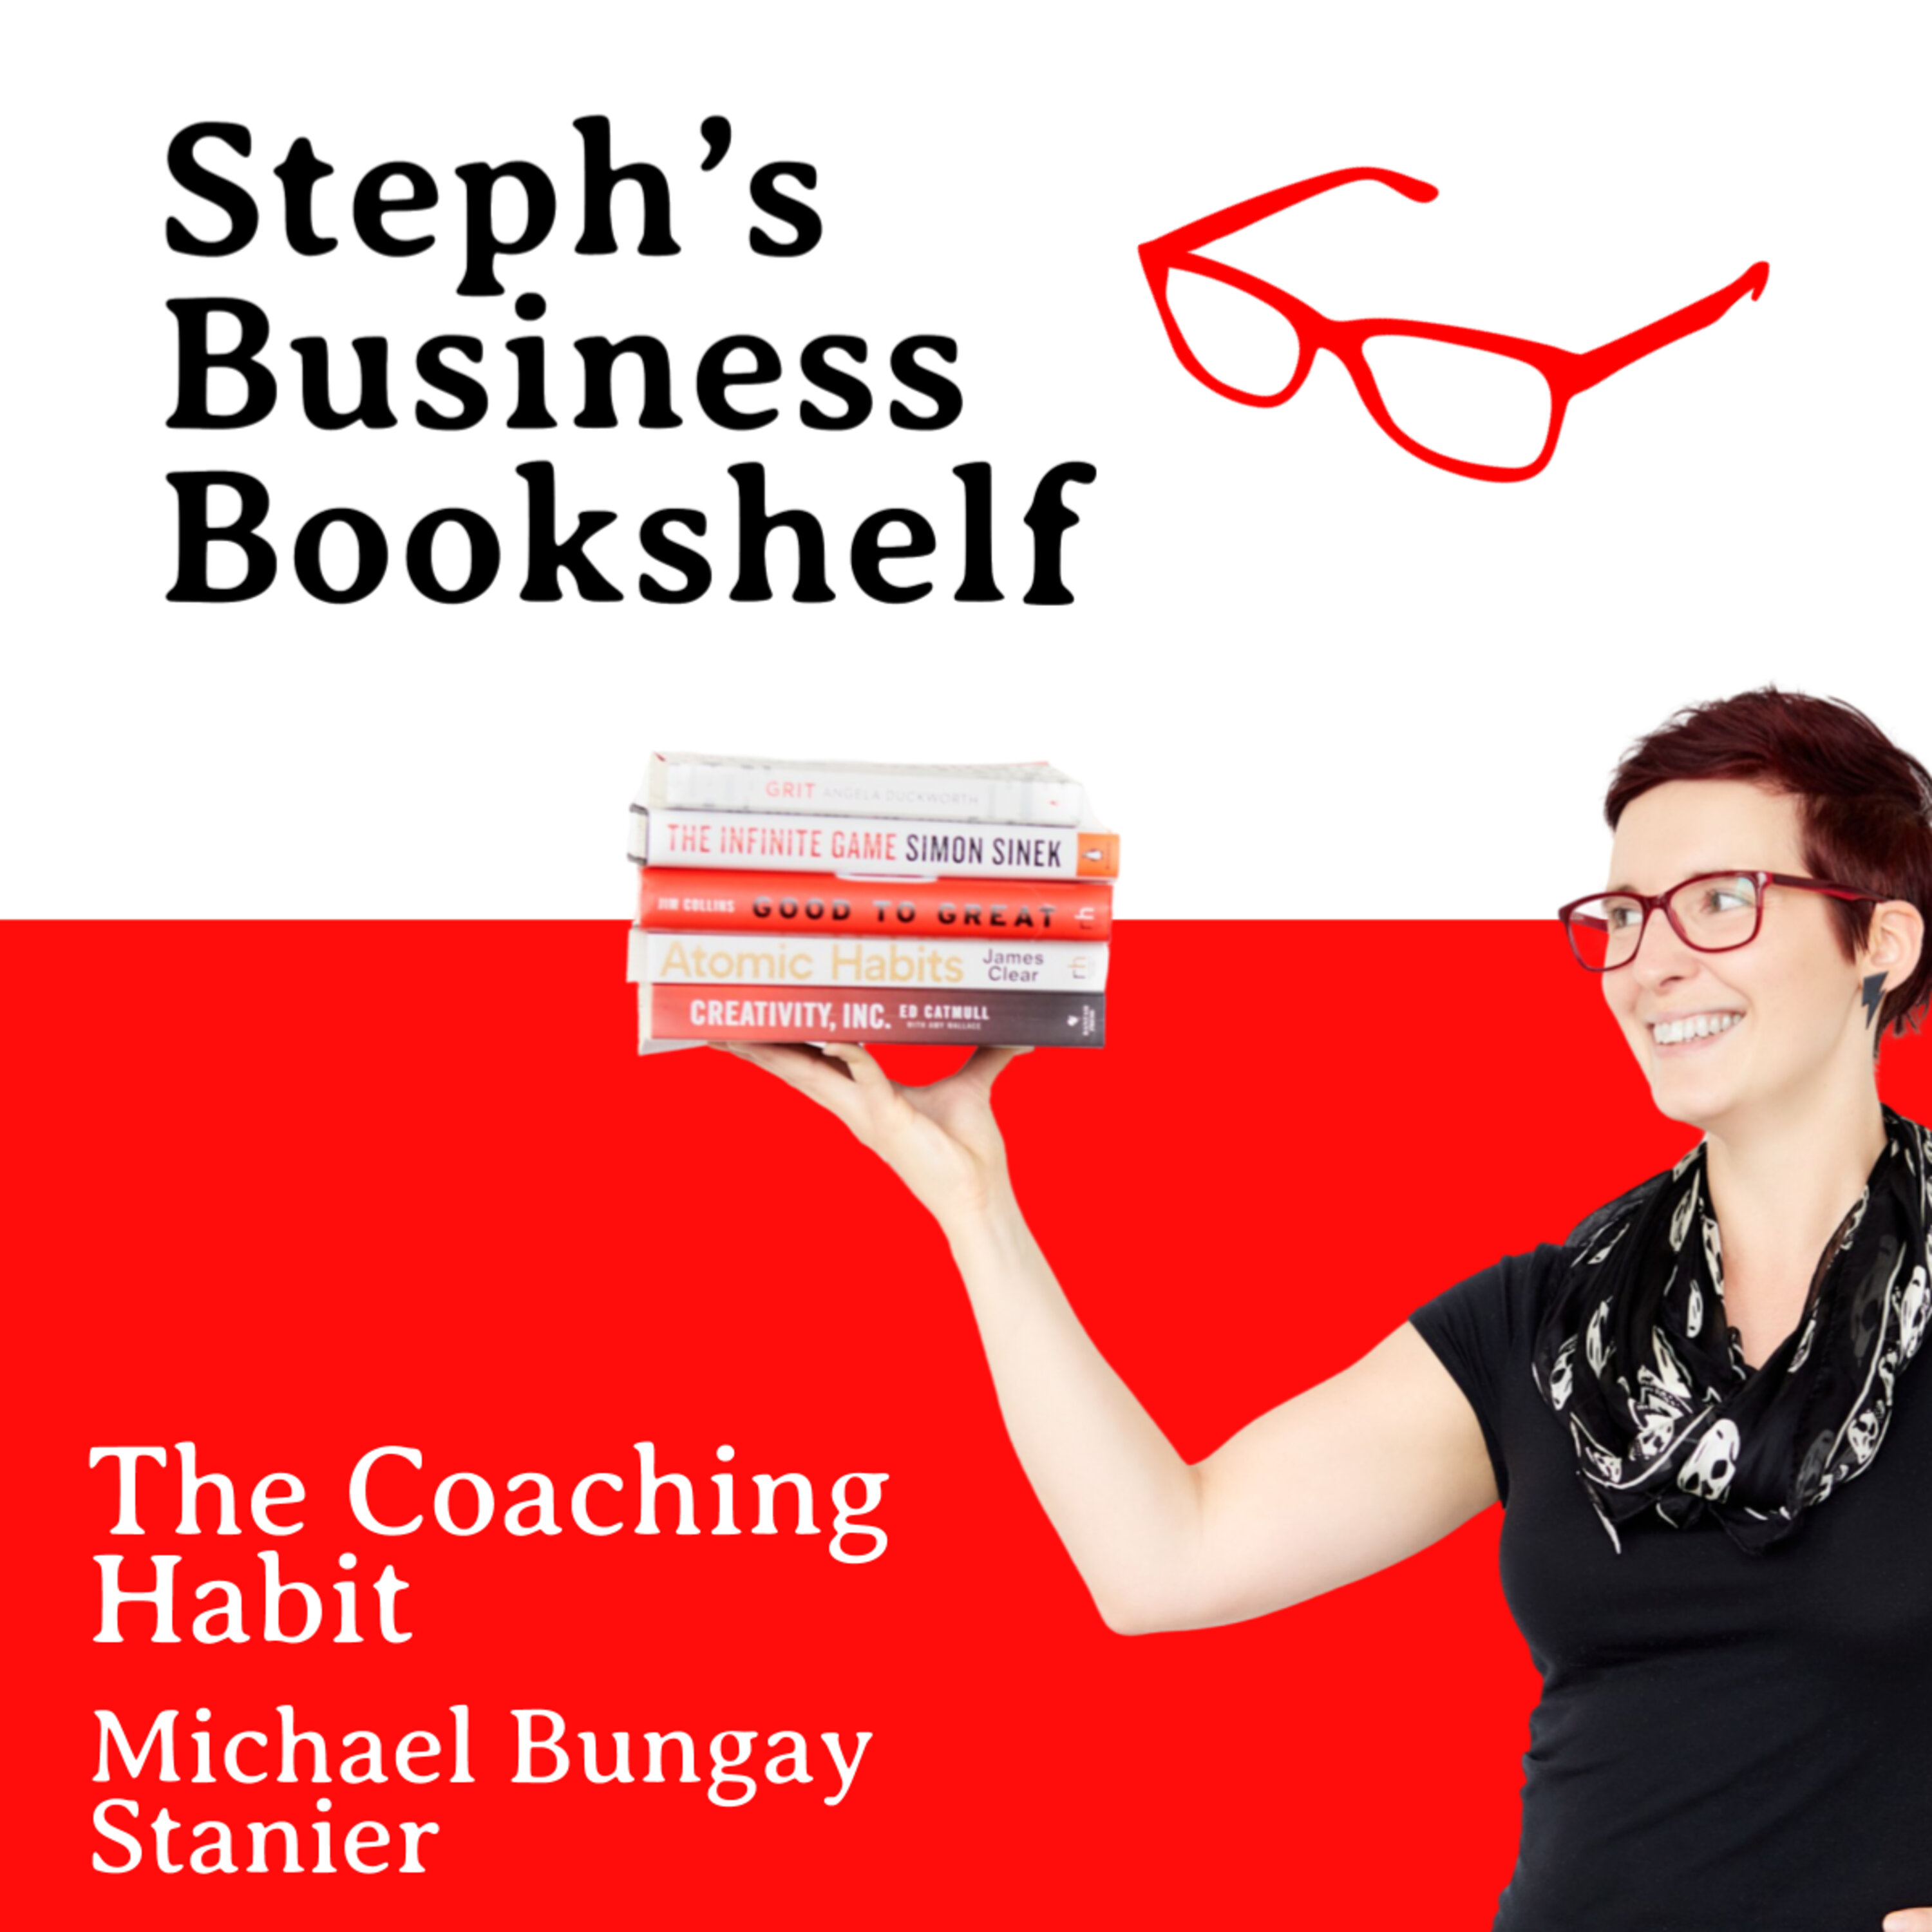 The Coaching Habit by Michael Bungay Stanier: How to unlock the most powerful leadership skill